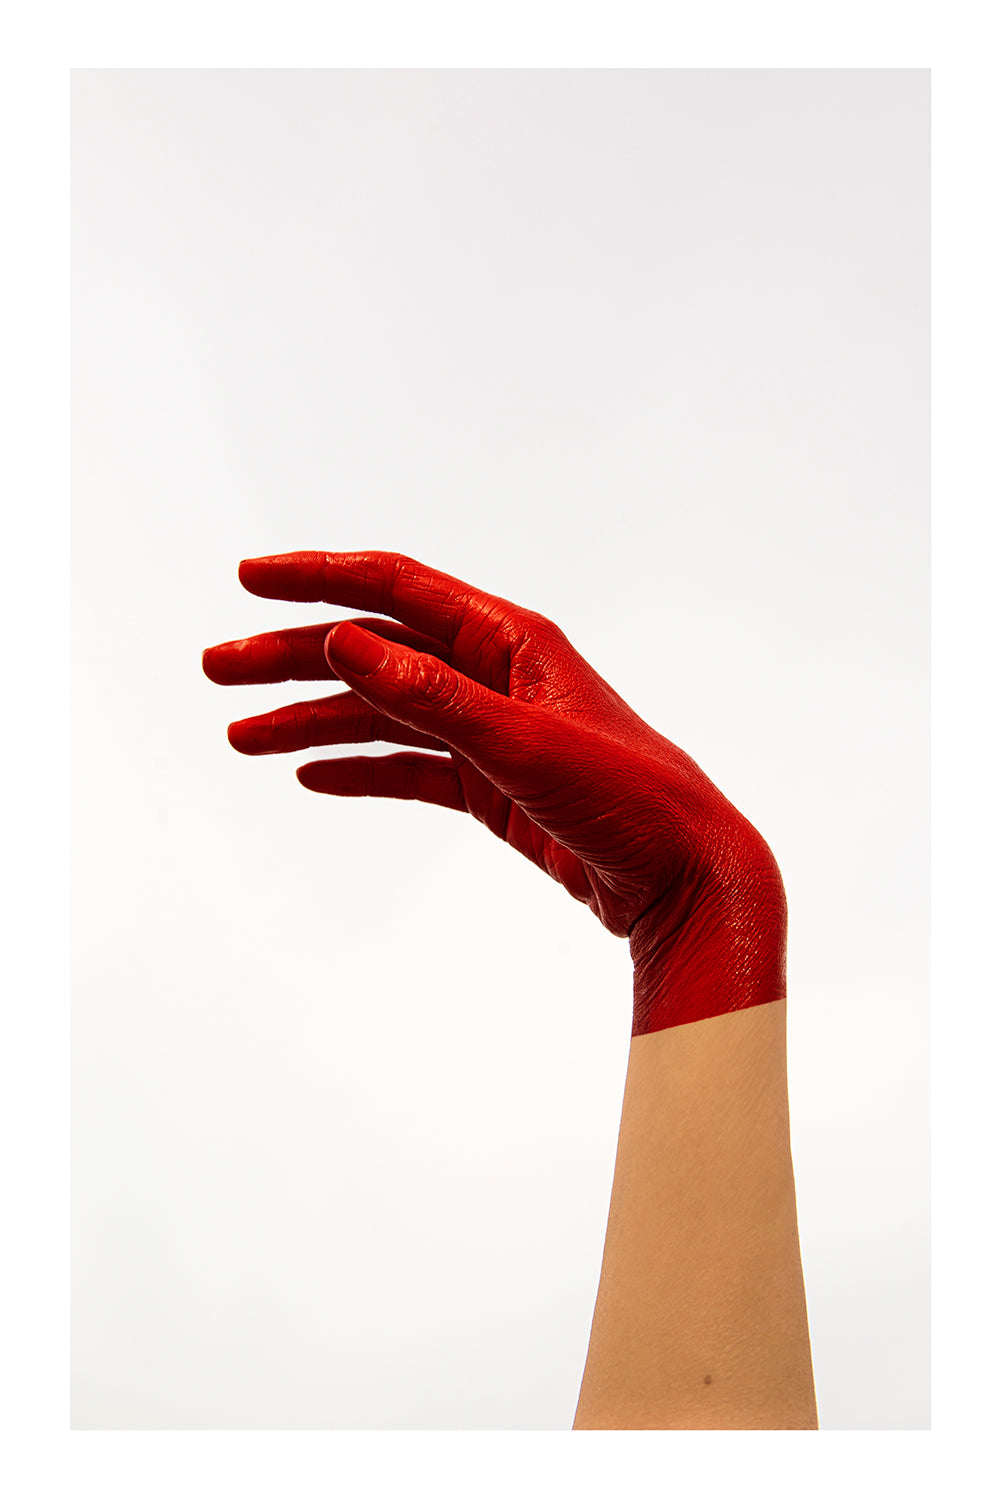 Marked 4 - limited Red Series - photography